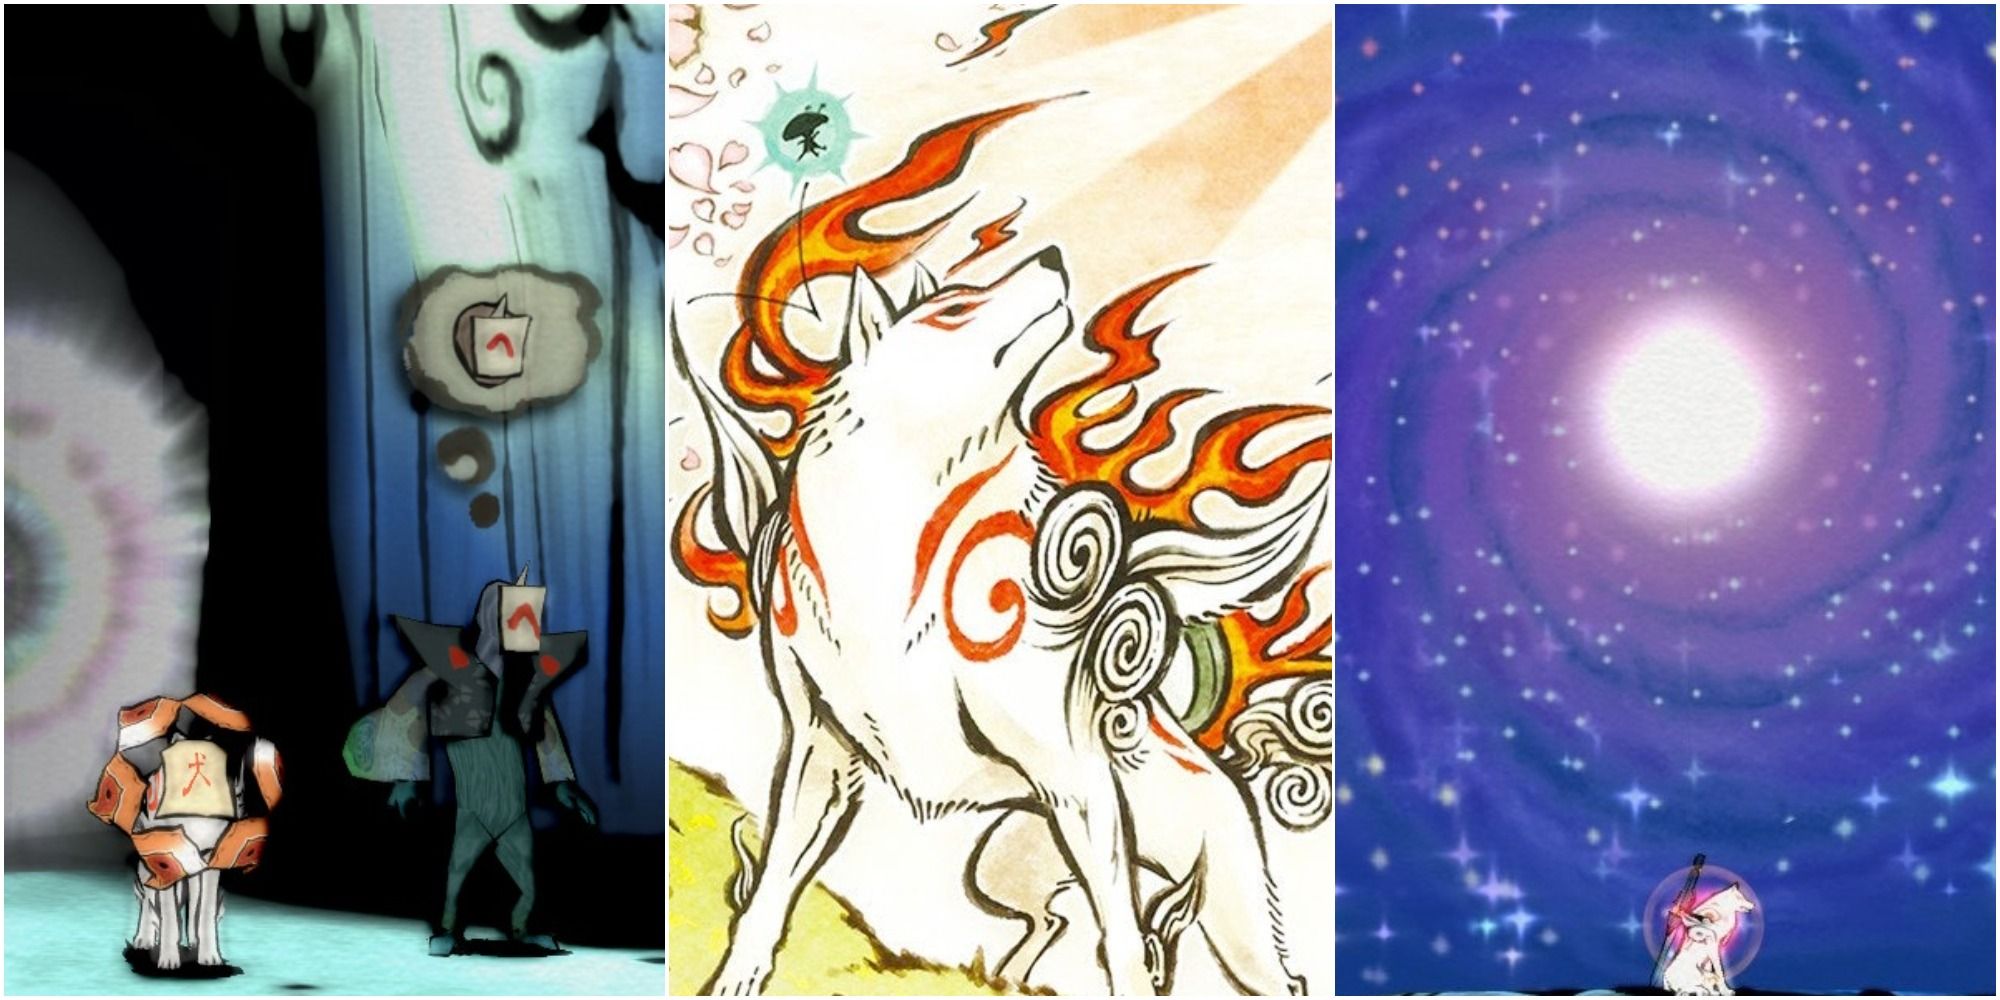 Okami' is a visual feast — and a good story